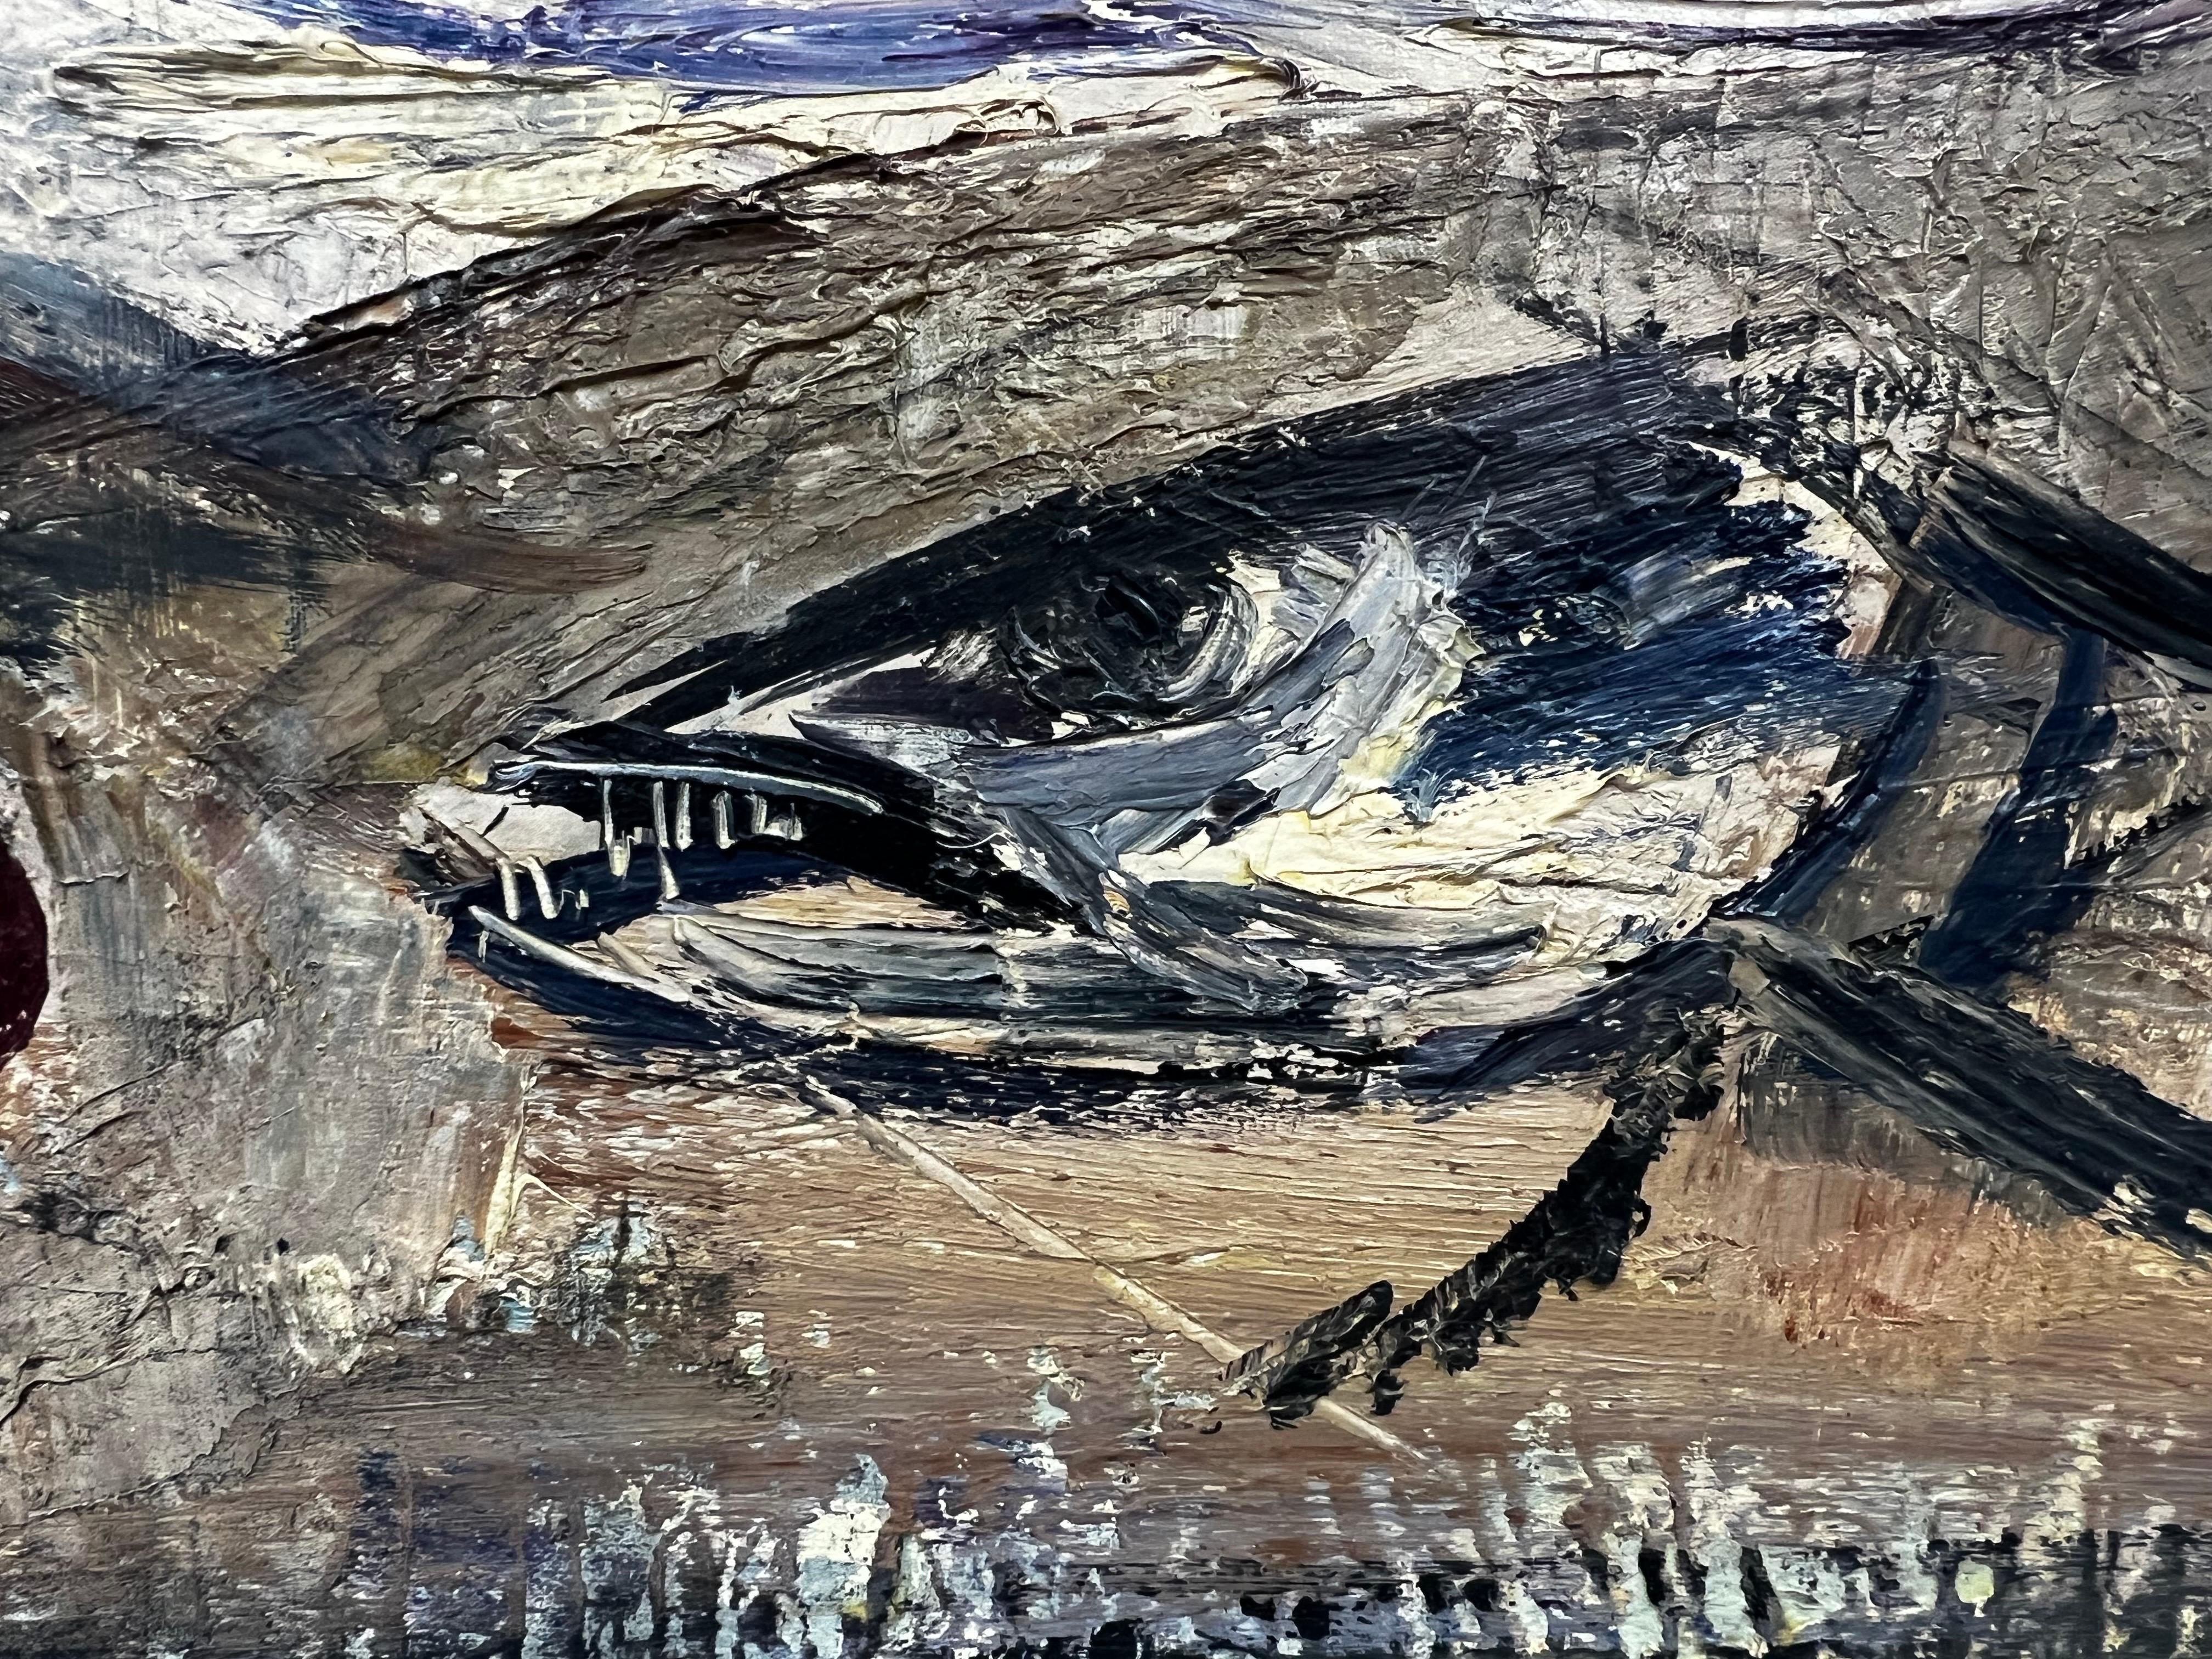 Fish for Supper
by Édouard Righetti (1924-2001)

Signed lower front 
oil painting on canvas, beautifully painted with thick impasto oil and bold colors. 
very good condition

size: 21 inches x 25.5 inches

provenance: all the paintings we have for